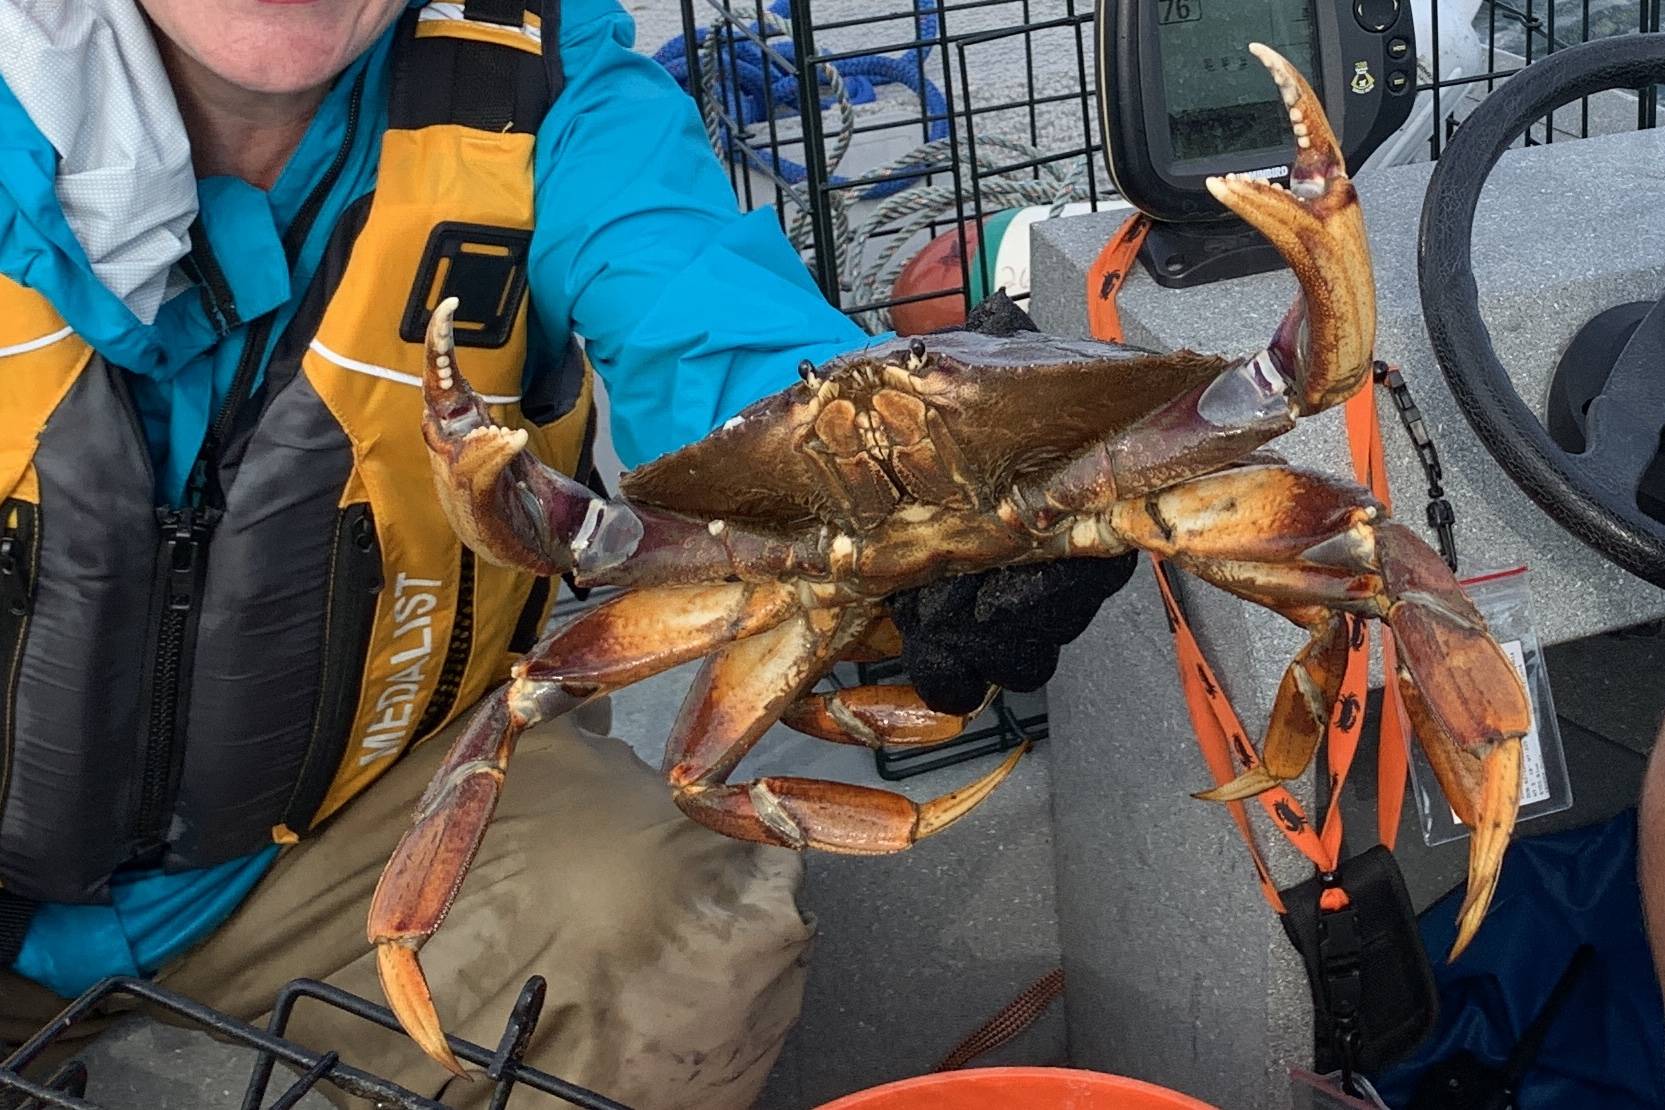 Photo courtesy America's Boating Club of Deception Pass
Inquiring minds hoping to nab that crab will have two opportunities to learn the tips and tricks of the trade this month before the recreational season opens July 1.